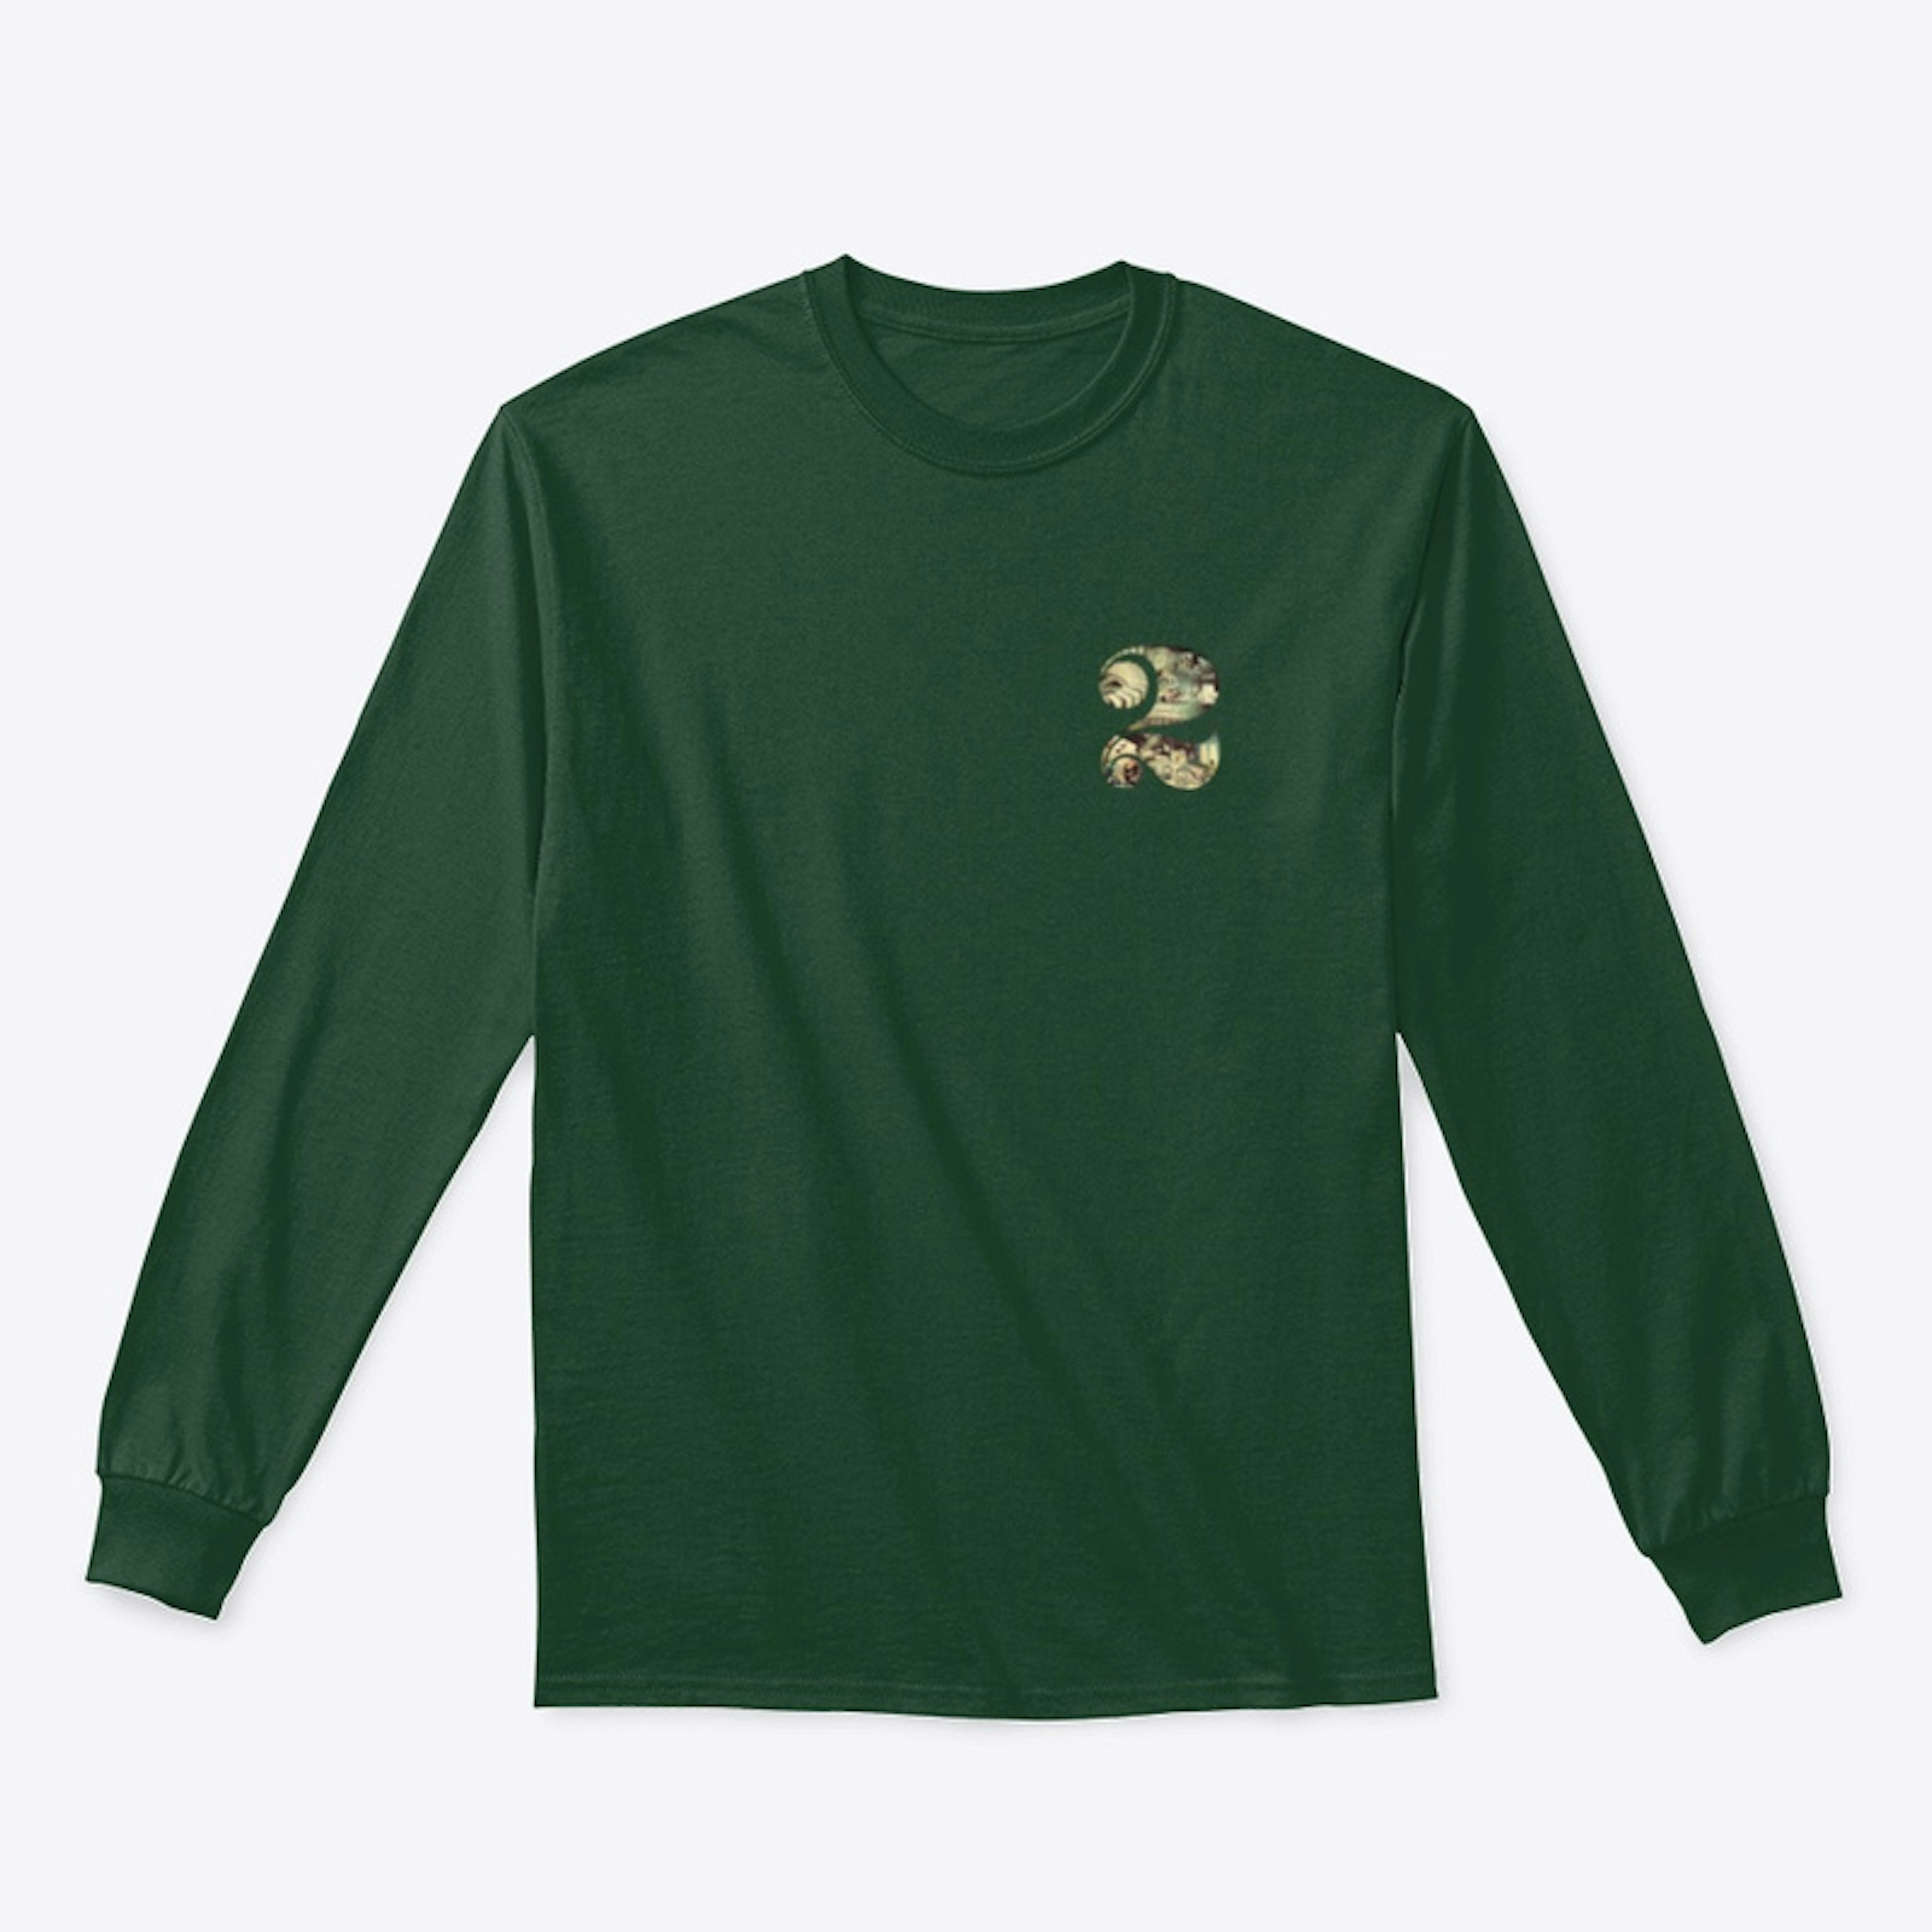 Green tops with $2 logo on front